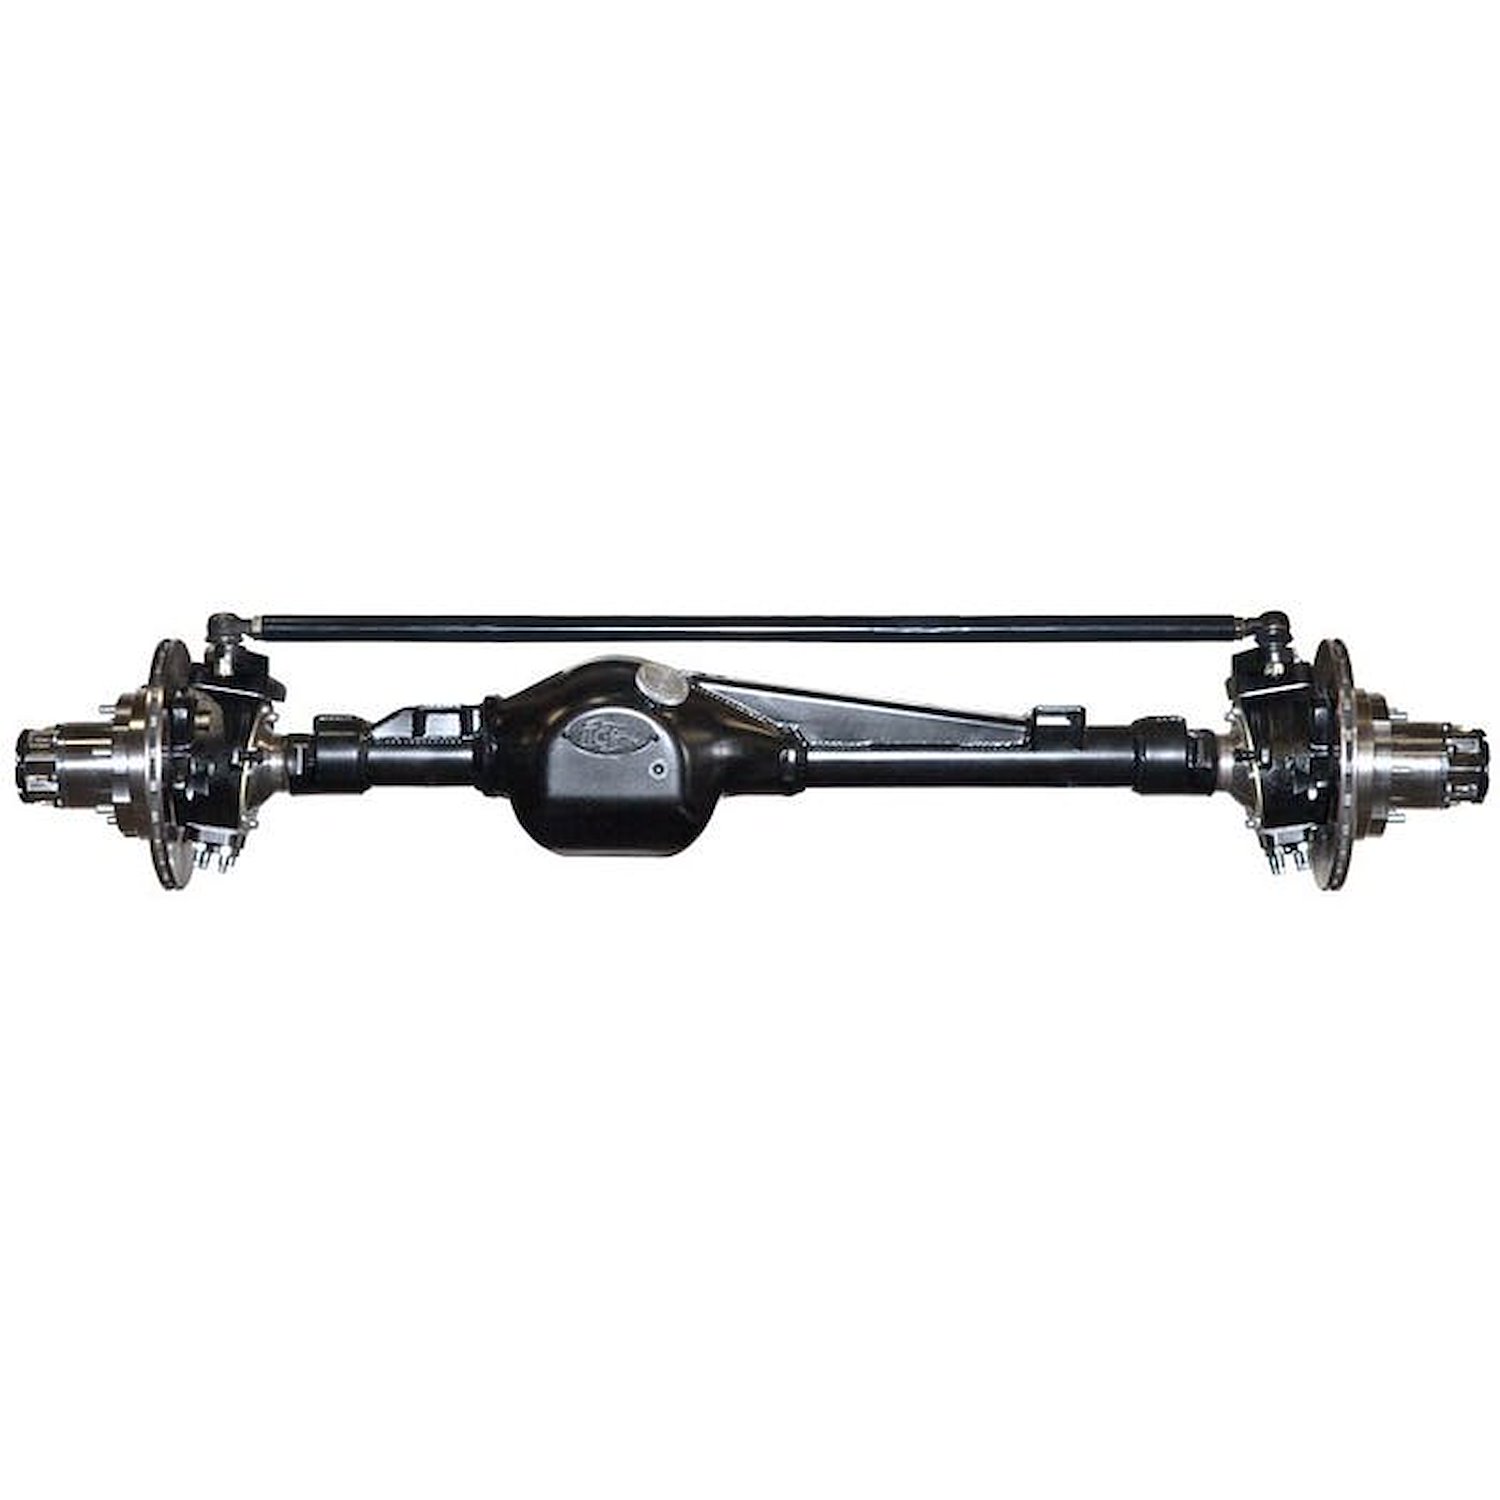 301304-1-KIT Rock Assault Fully-Built Front Axles, +5 Width LHD High-Pinion 5.29 Detroit Creeper Flanges Toyota